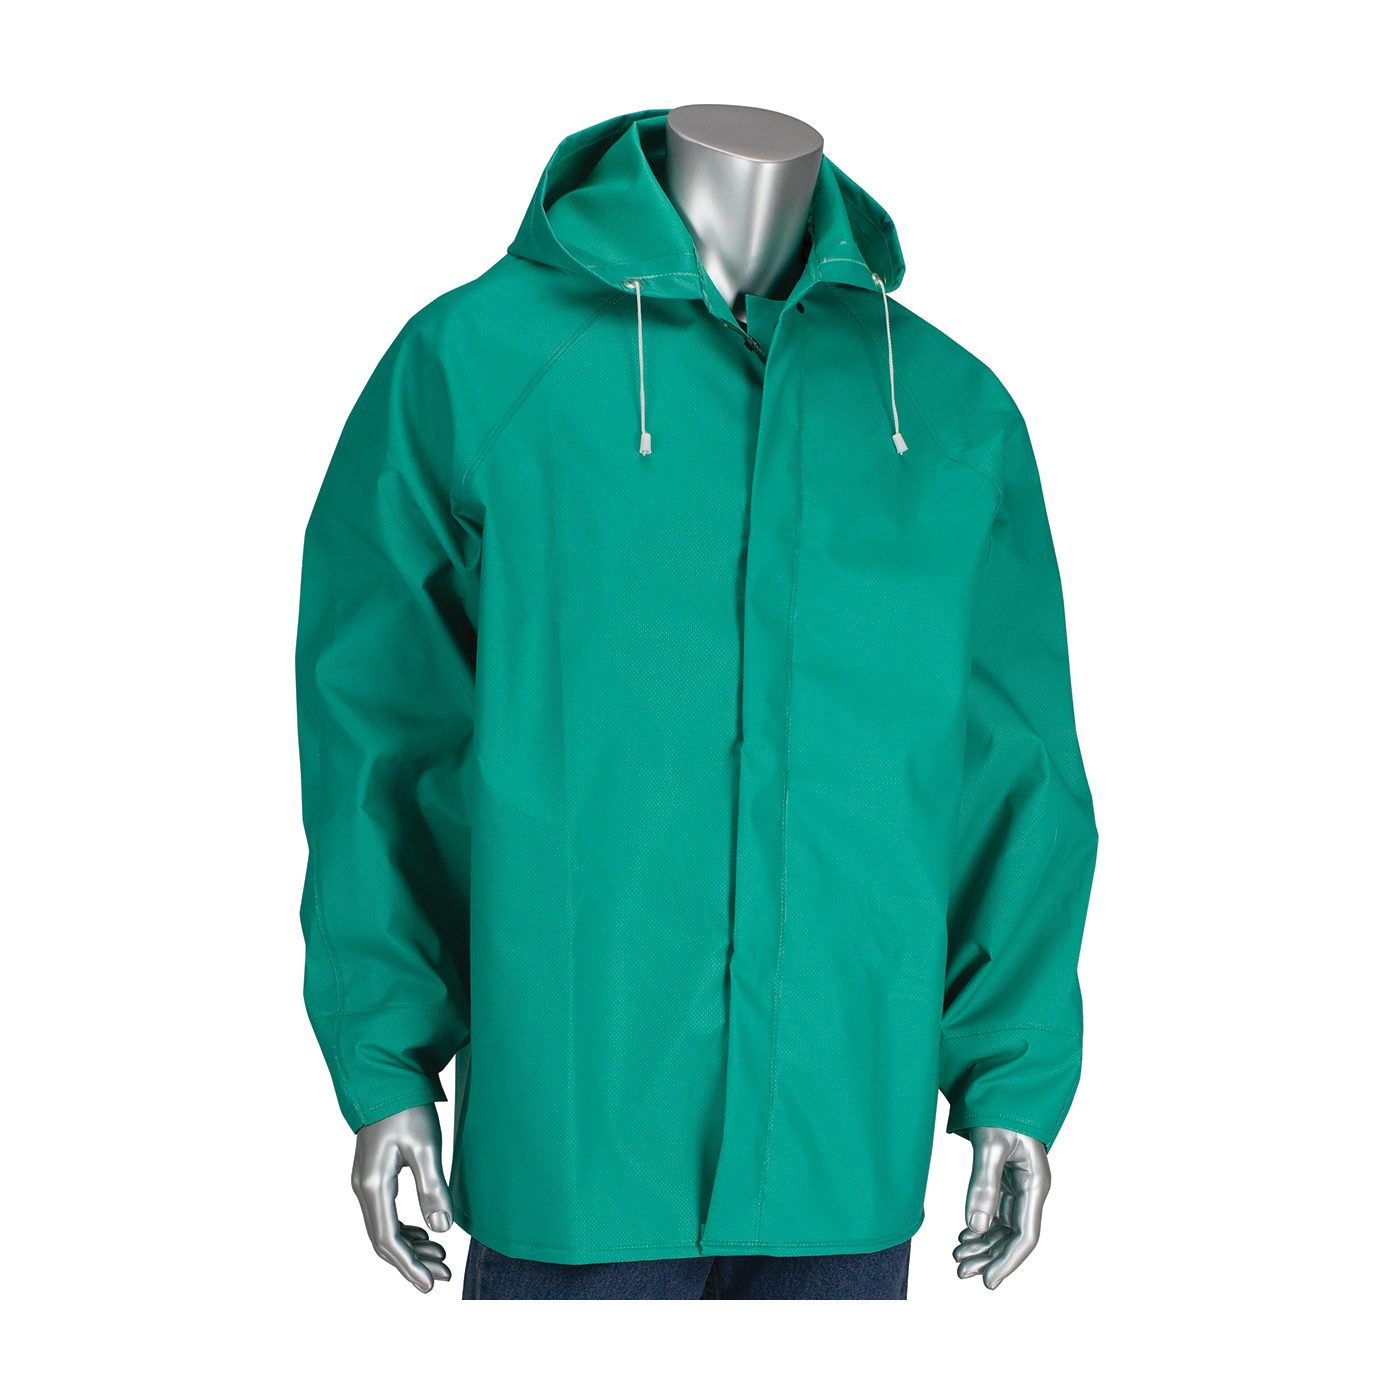 PIP® FALCON™ ChemFR™ 205-420JH/3X Rain Jacket With Hood, 3XL, Green, Nylon/PVC, Resists: Flame and Water, ASTM D6413